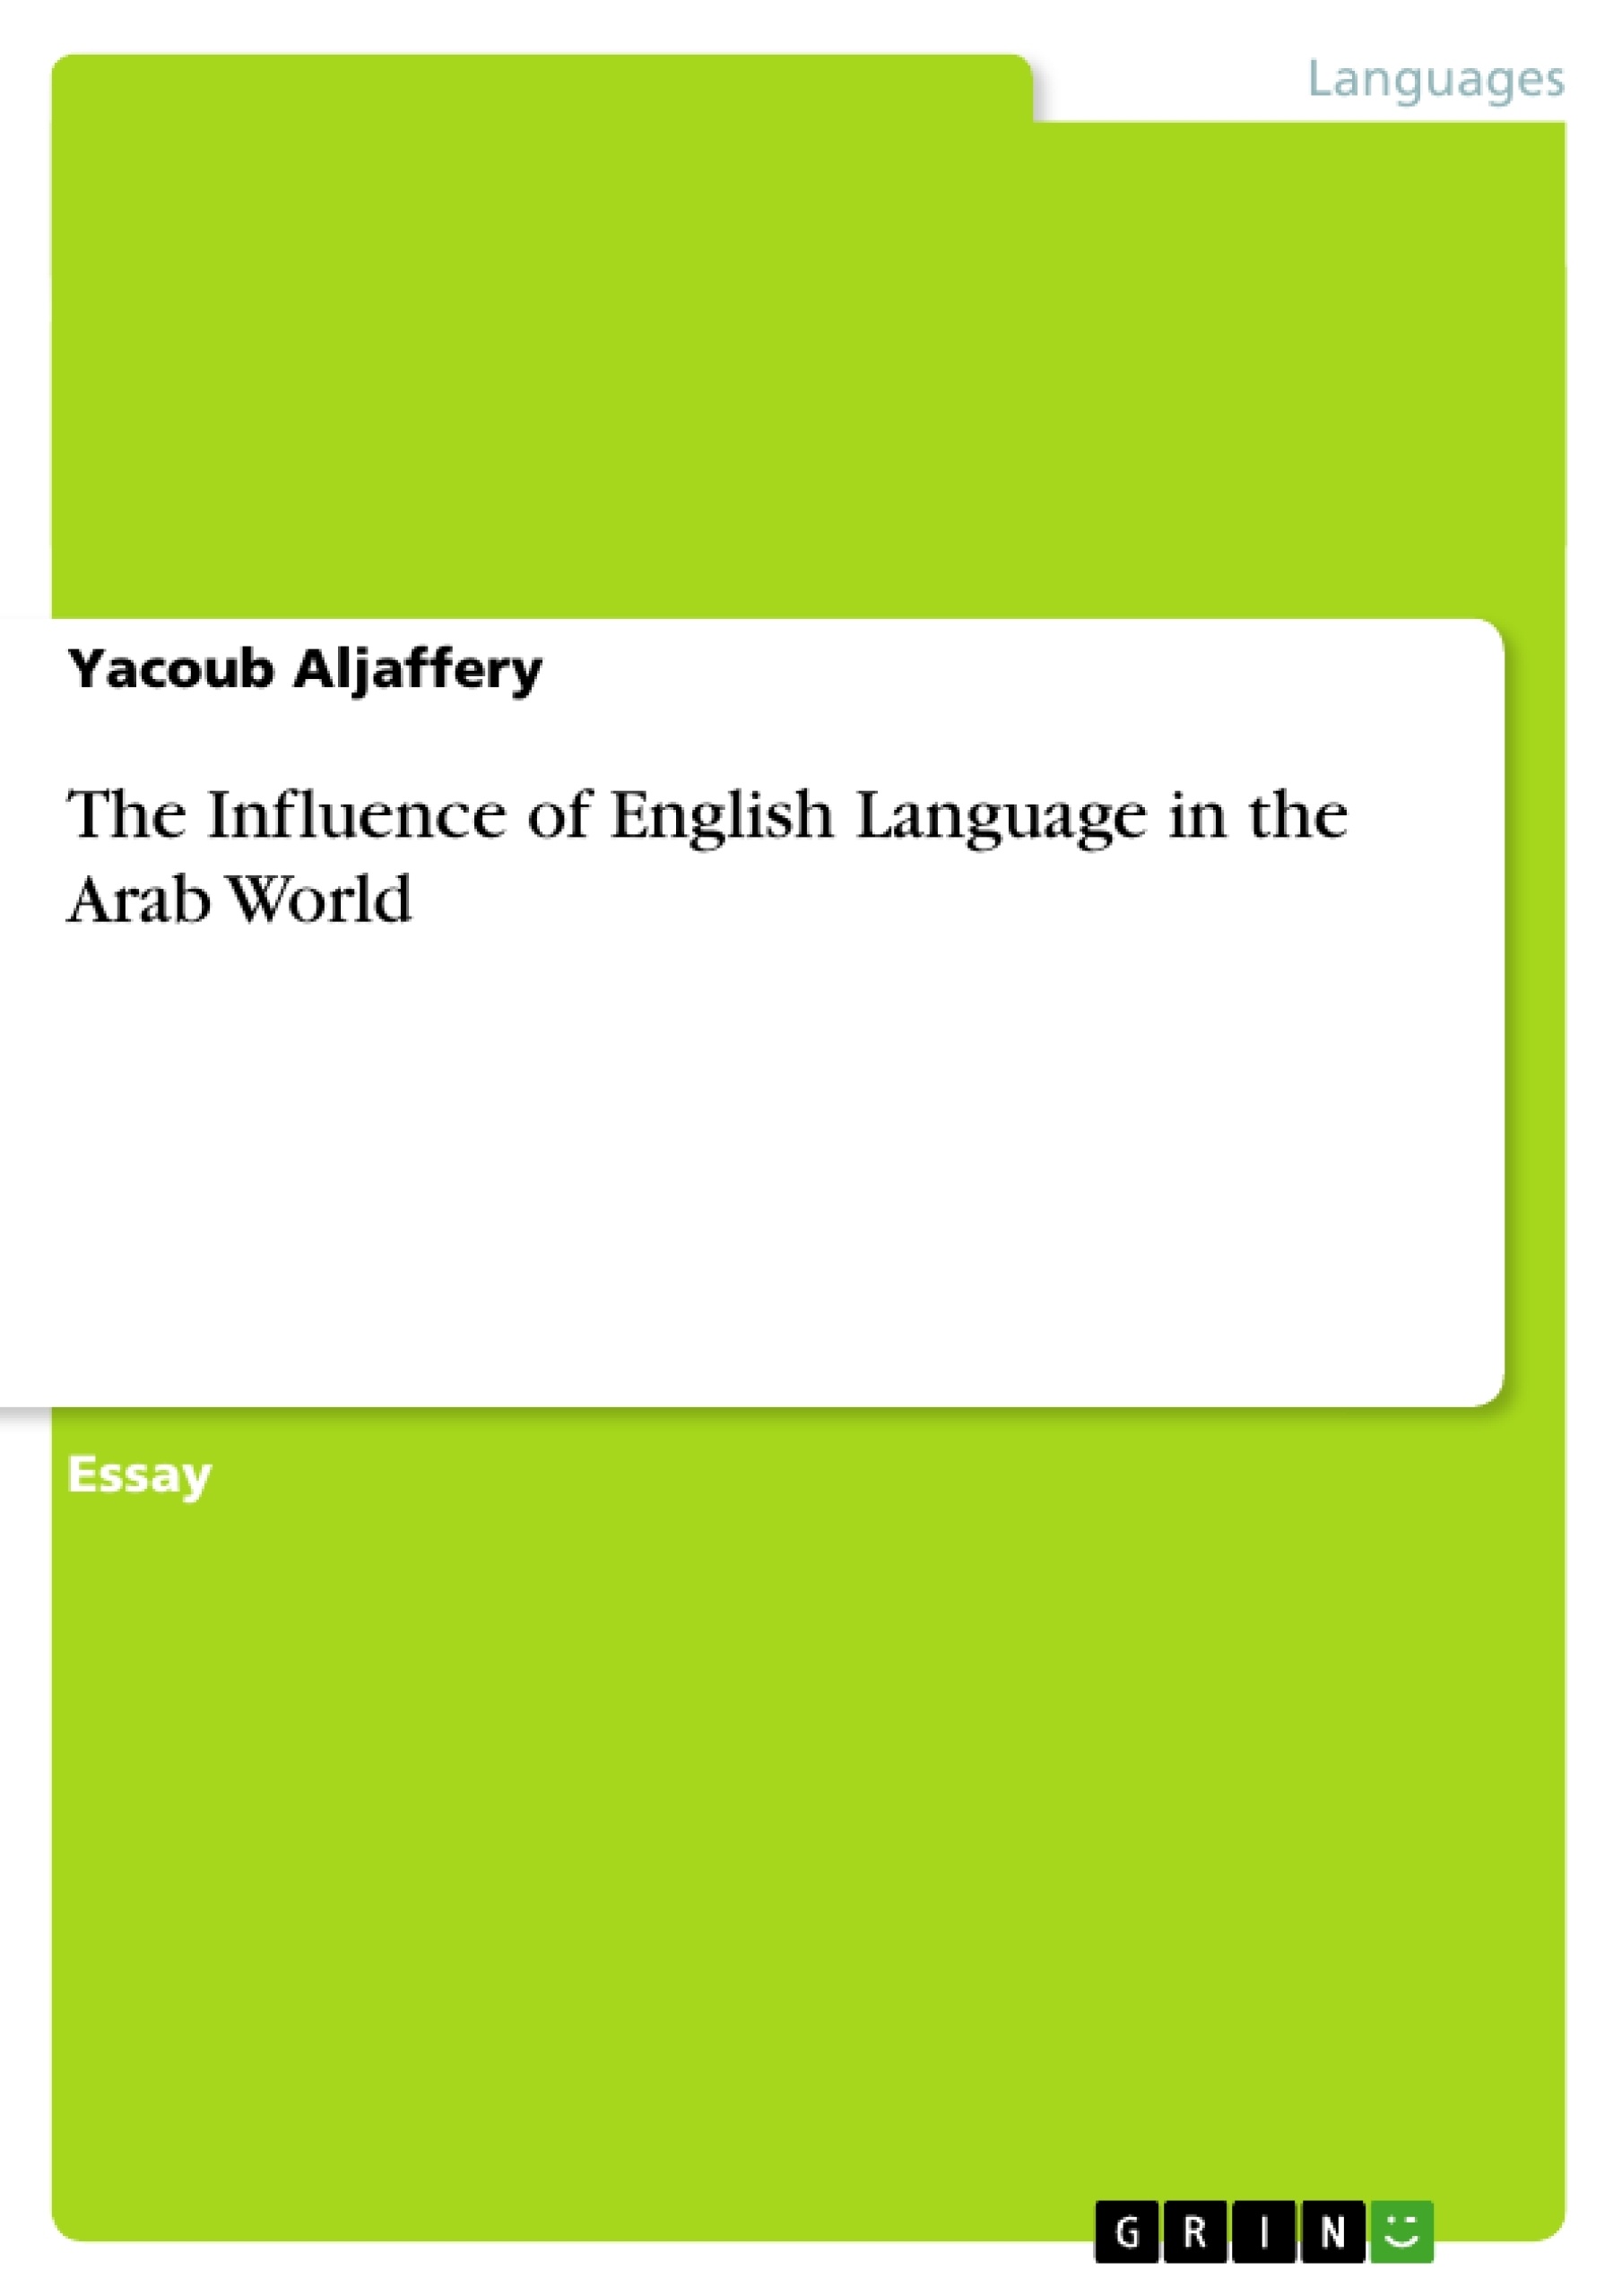 Title: The Influence of English Language in the Arab World